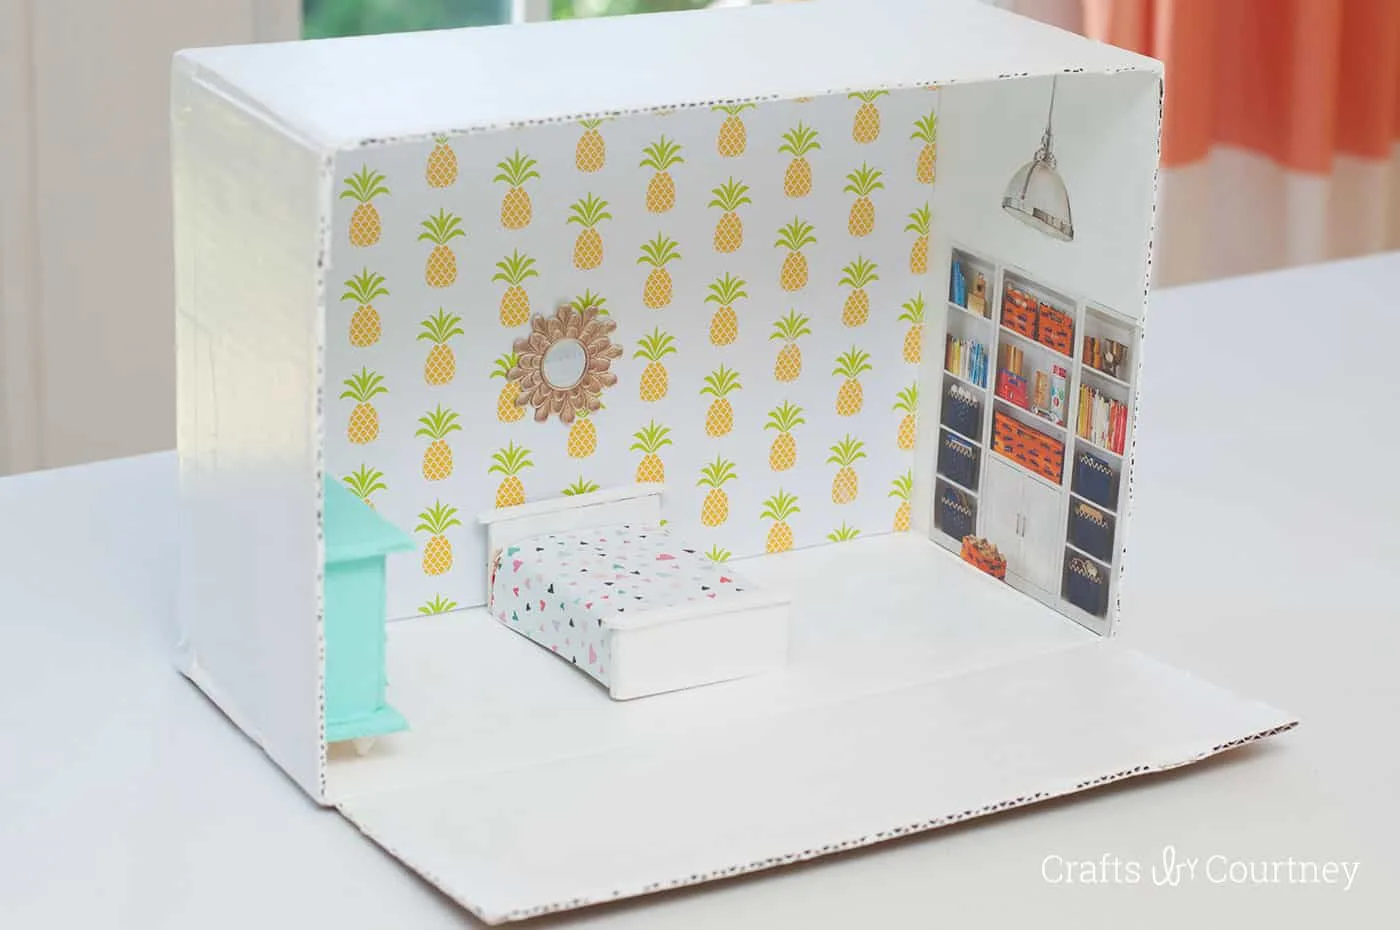 Don't spend big bucks on a dollhouse - this DIY dollhouse project will show you how to make an awesome version from a cardboard box!